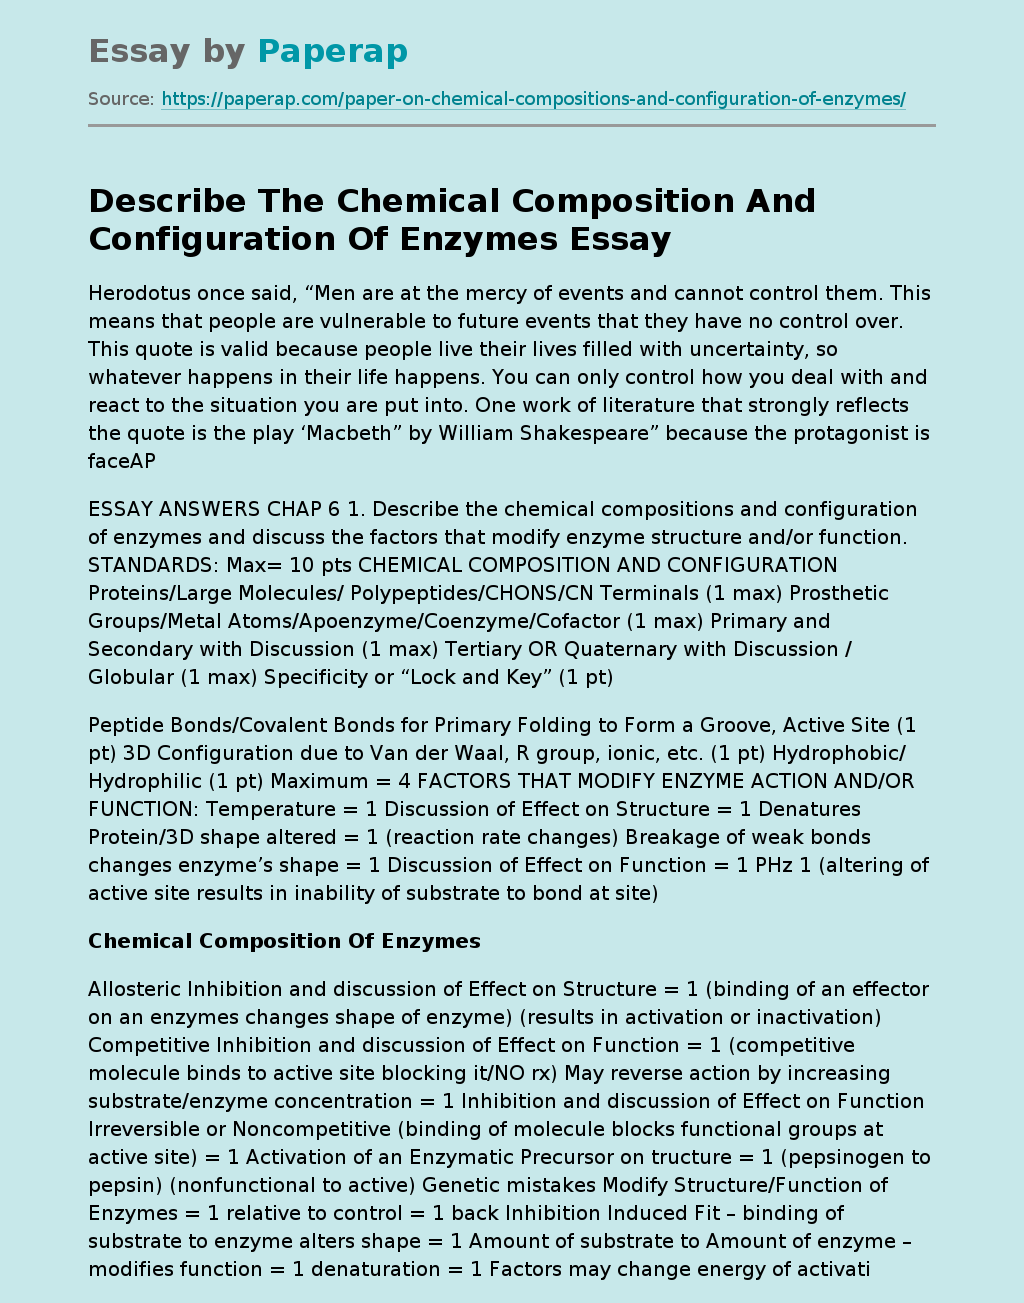 Describe The Chemical Composition And Configuration Of Enzymes